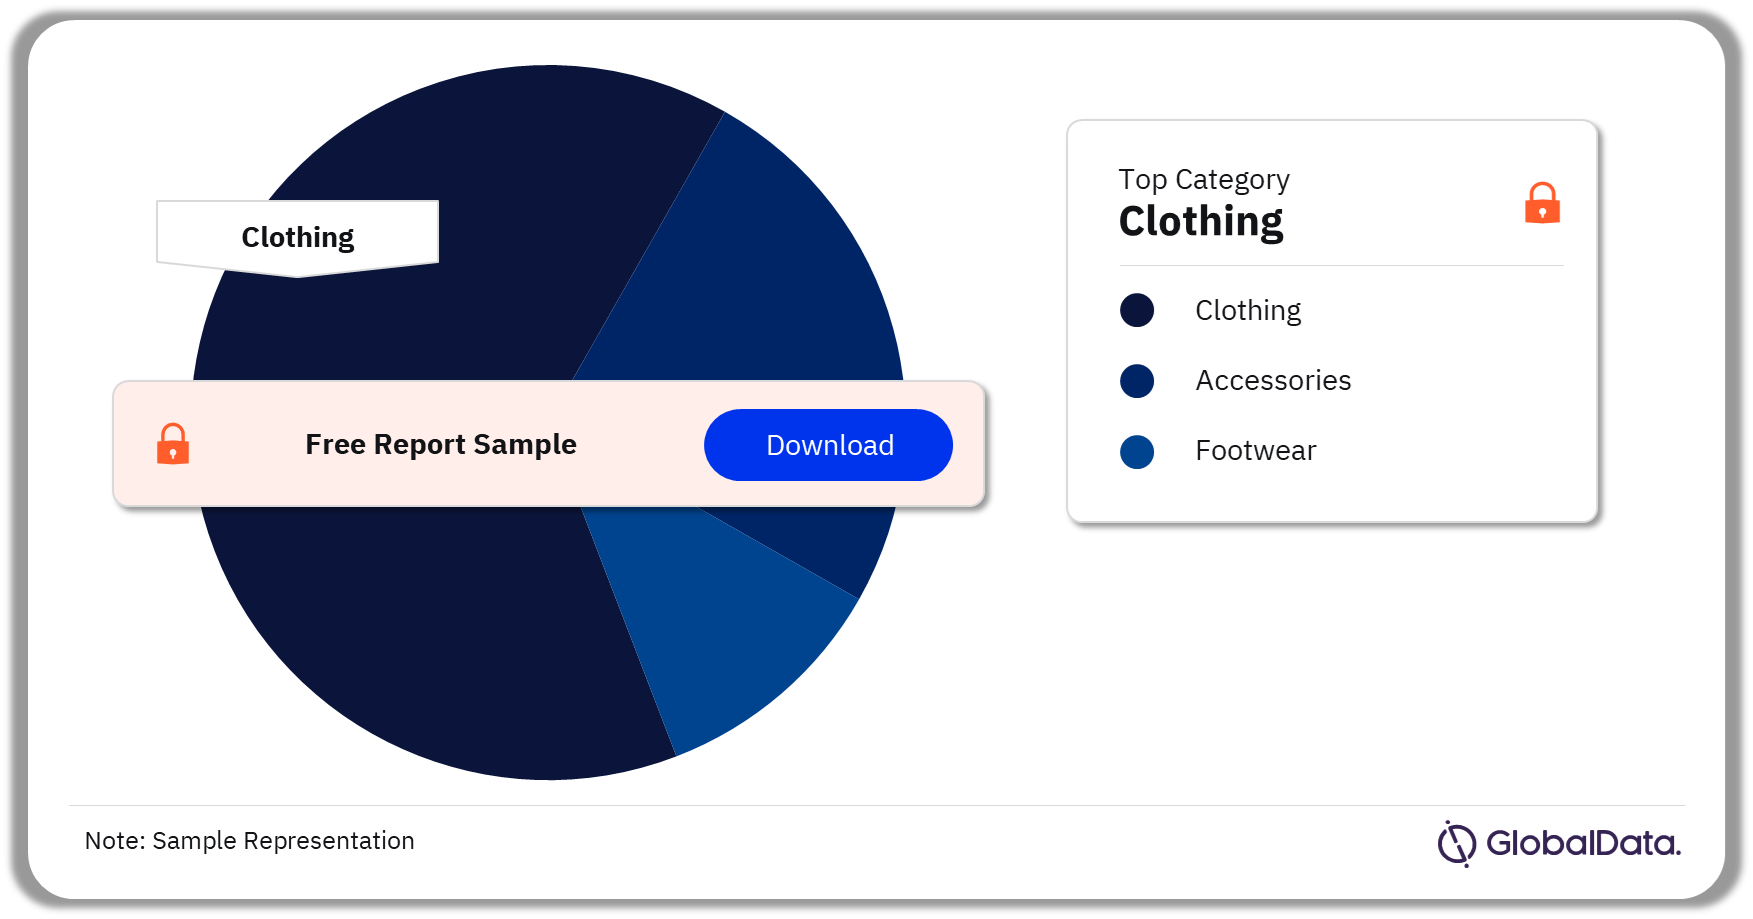 MEA Apparel Market Analysis by Categories, 2022 (%)